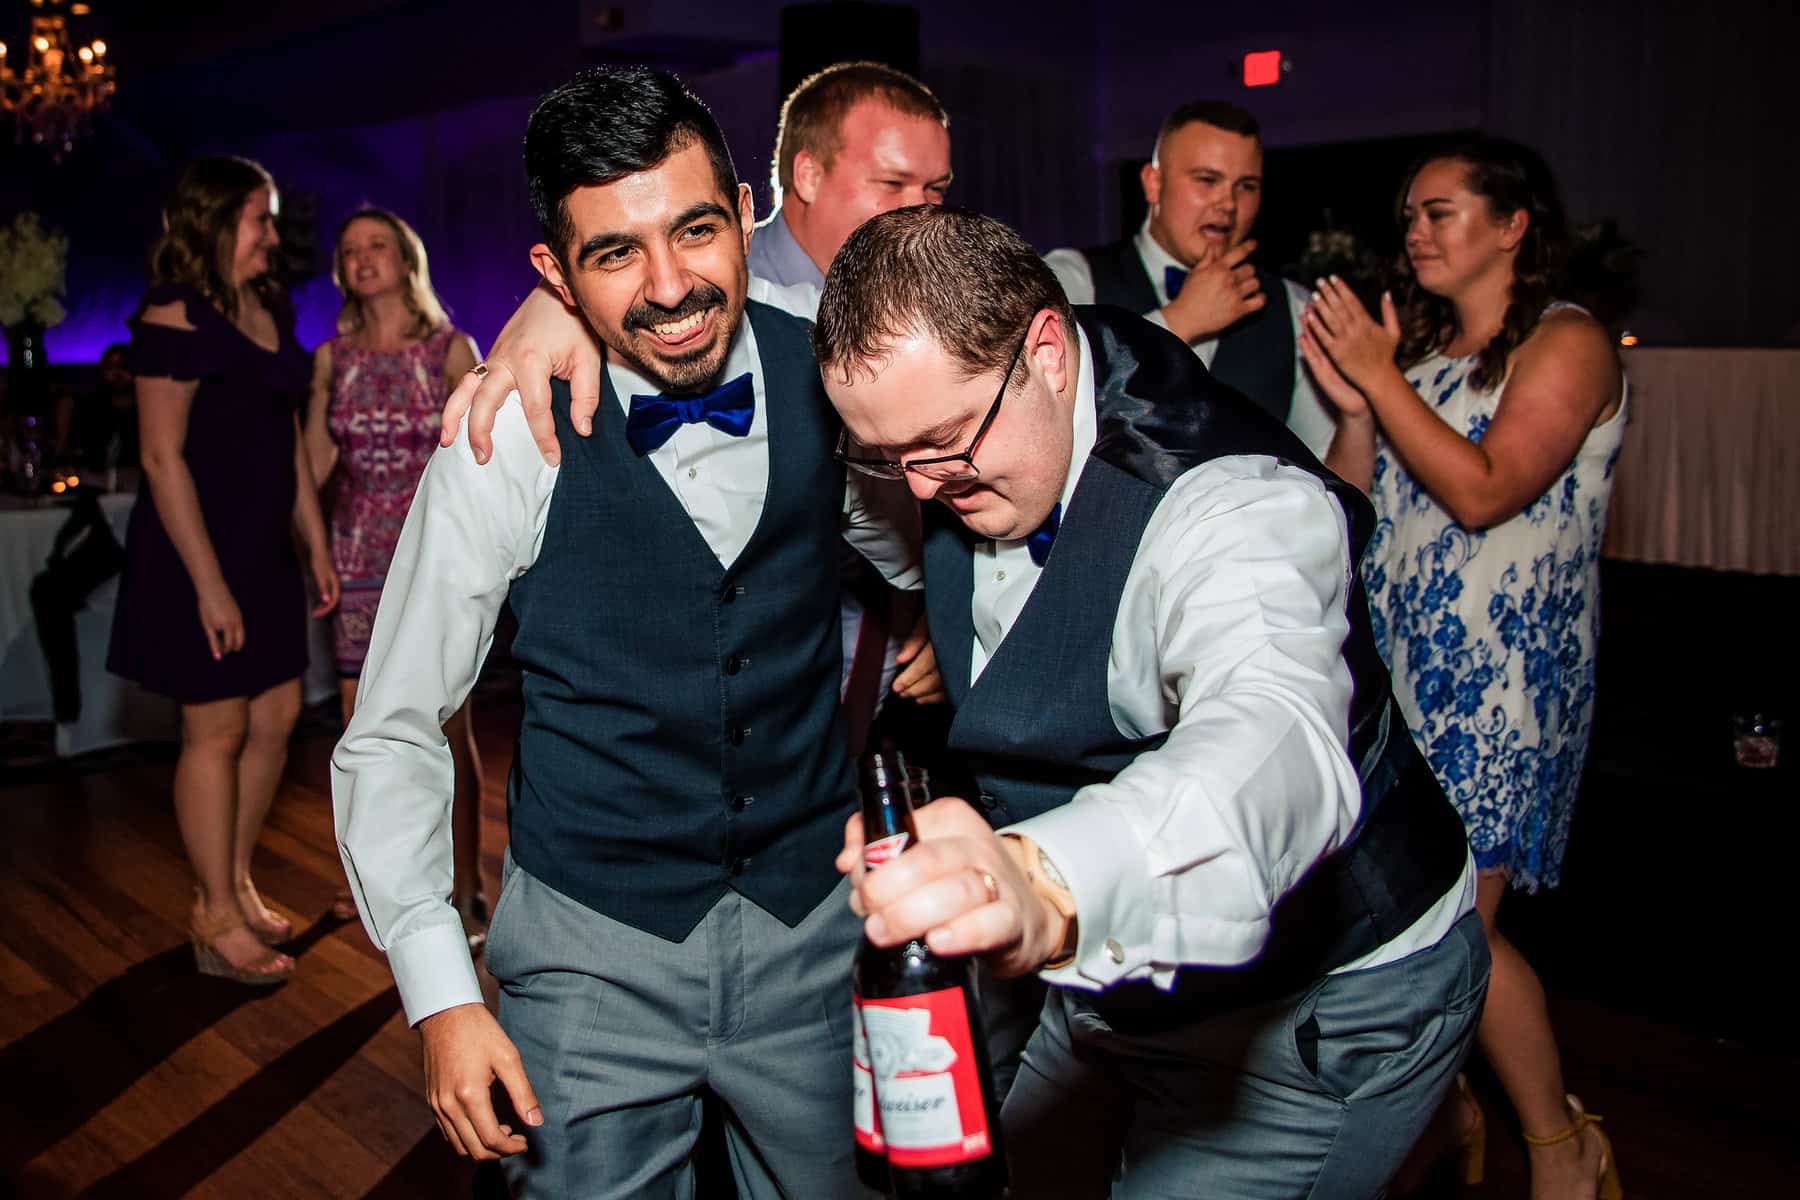 A group of men dancing on the dance floor at a wedding.